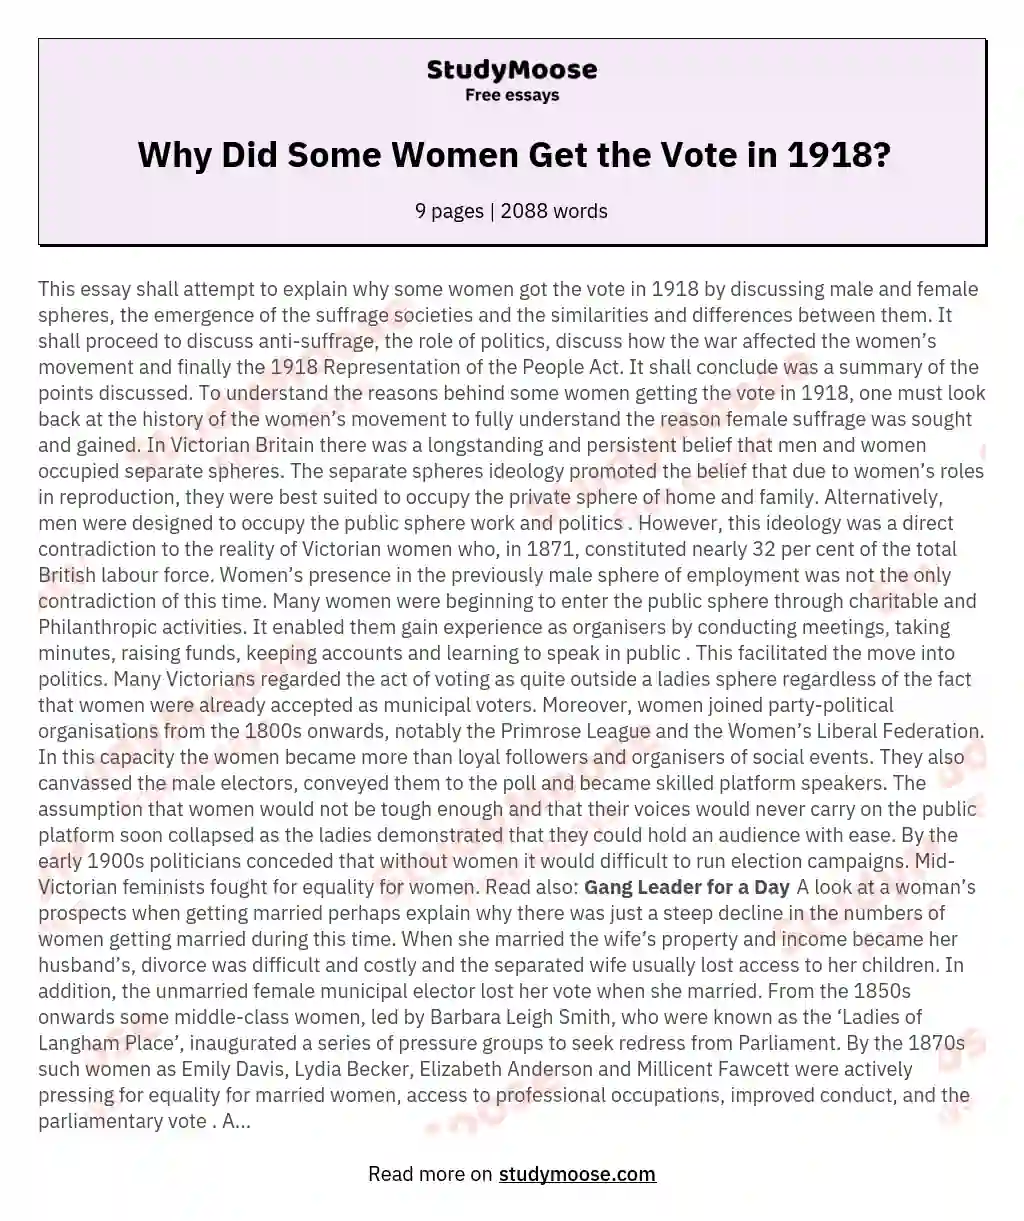 Why Did Some Women Get the Vote in 1918?